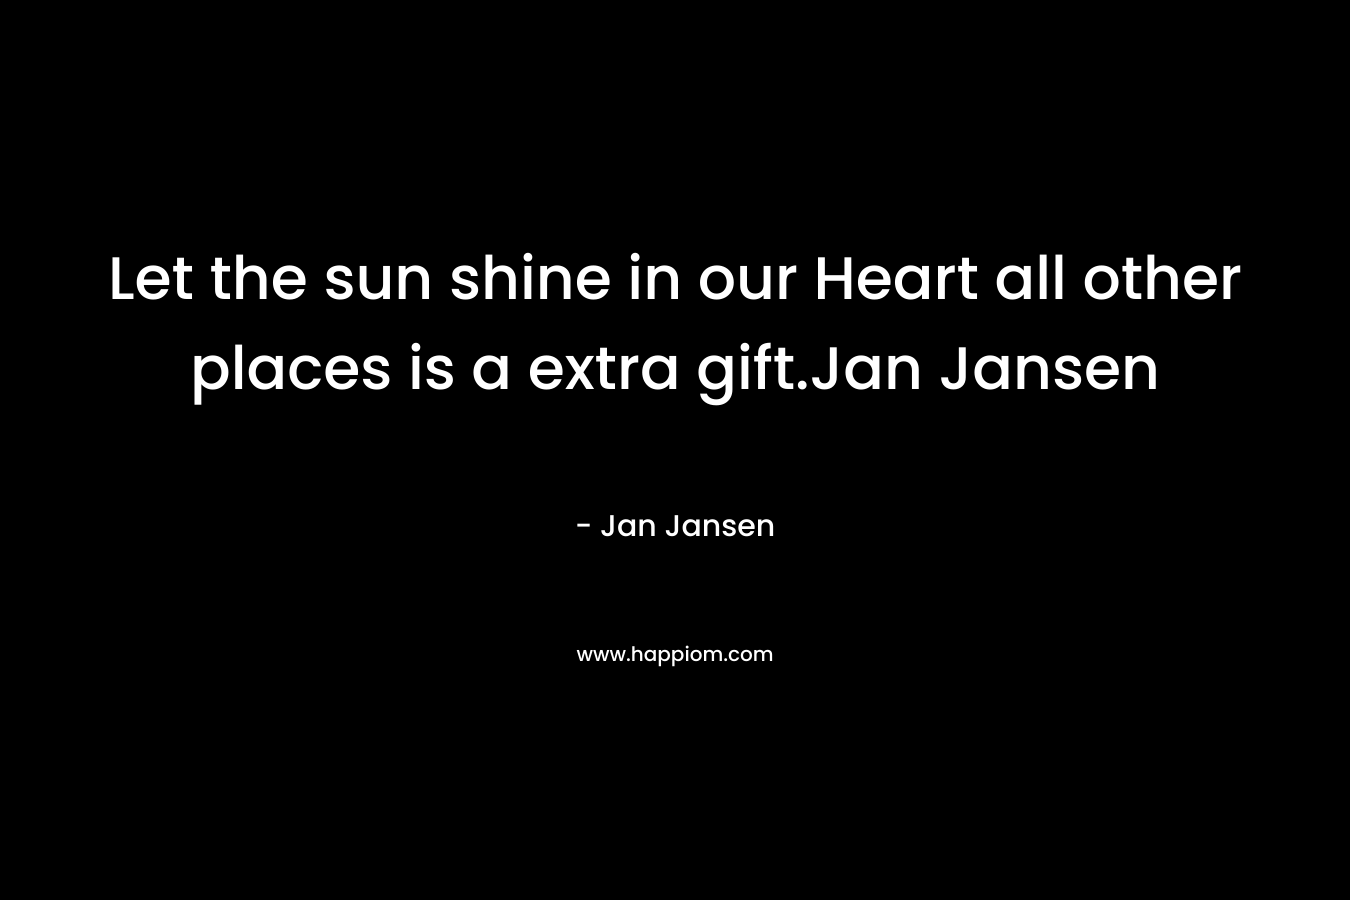 Let the sun shine in our Heart all other places is a extra gift.Jan Jansen